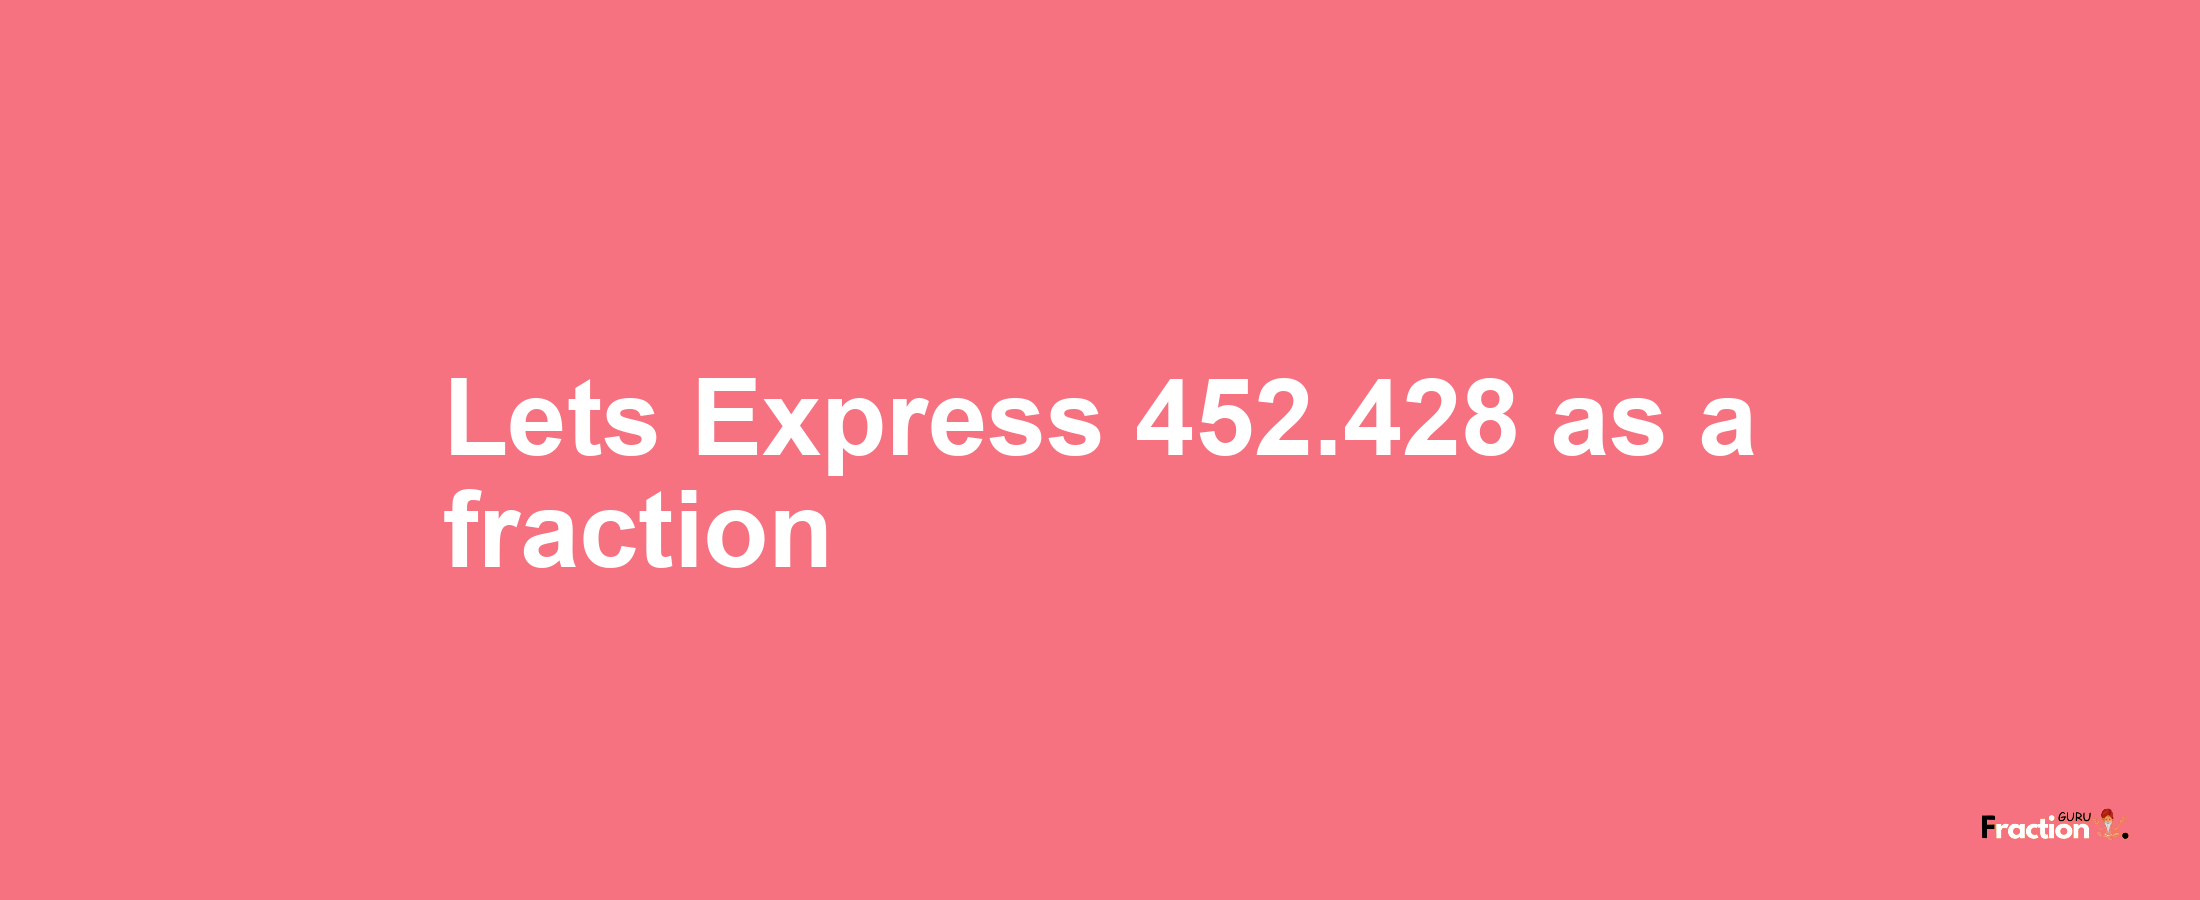 Lets Express 452.428 as afraction